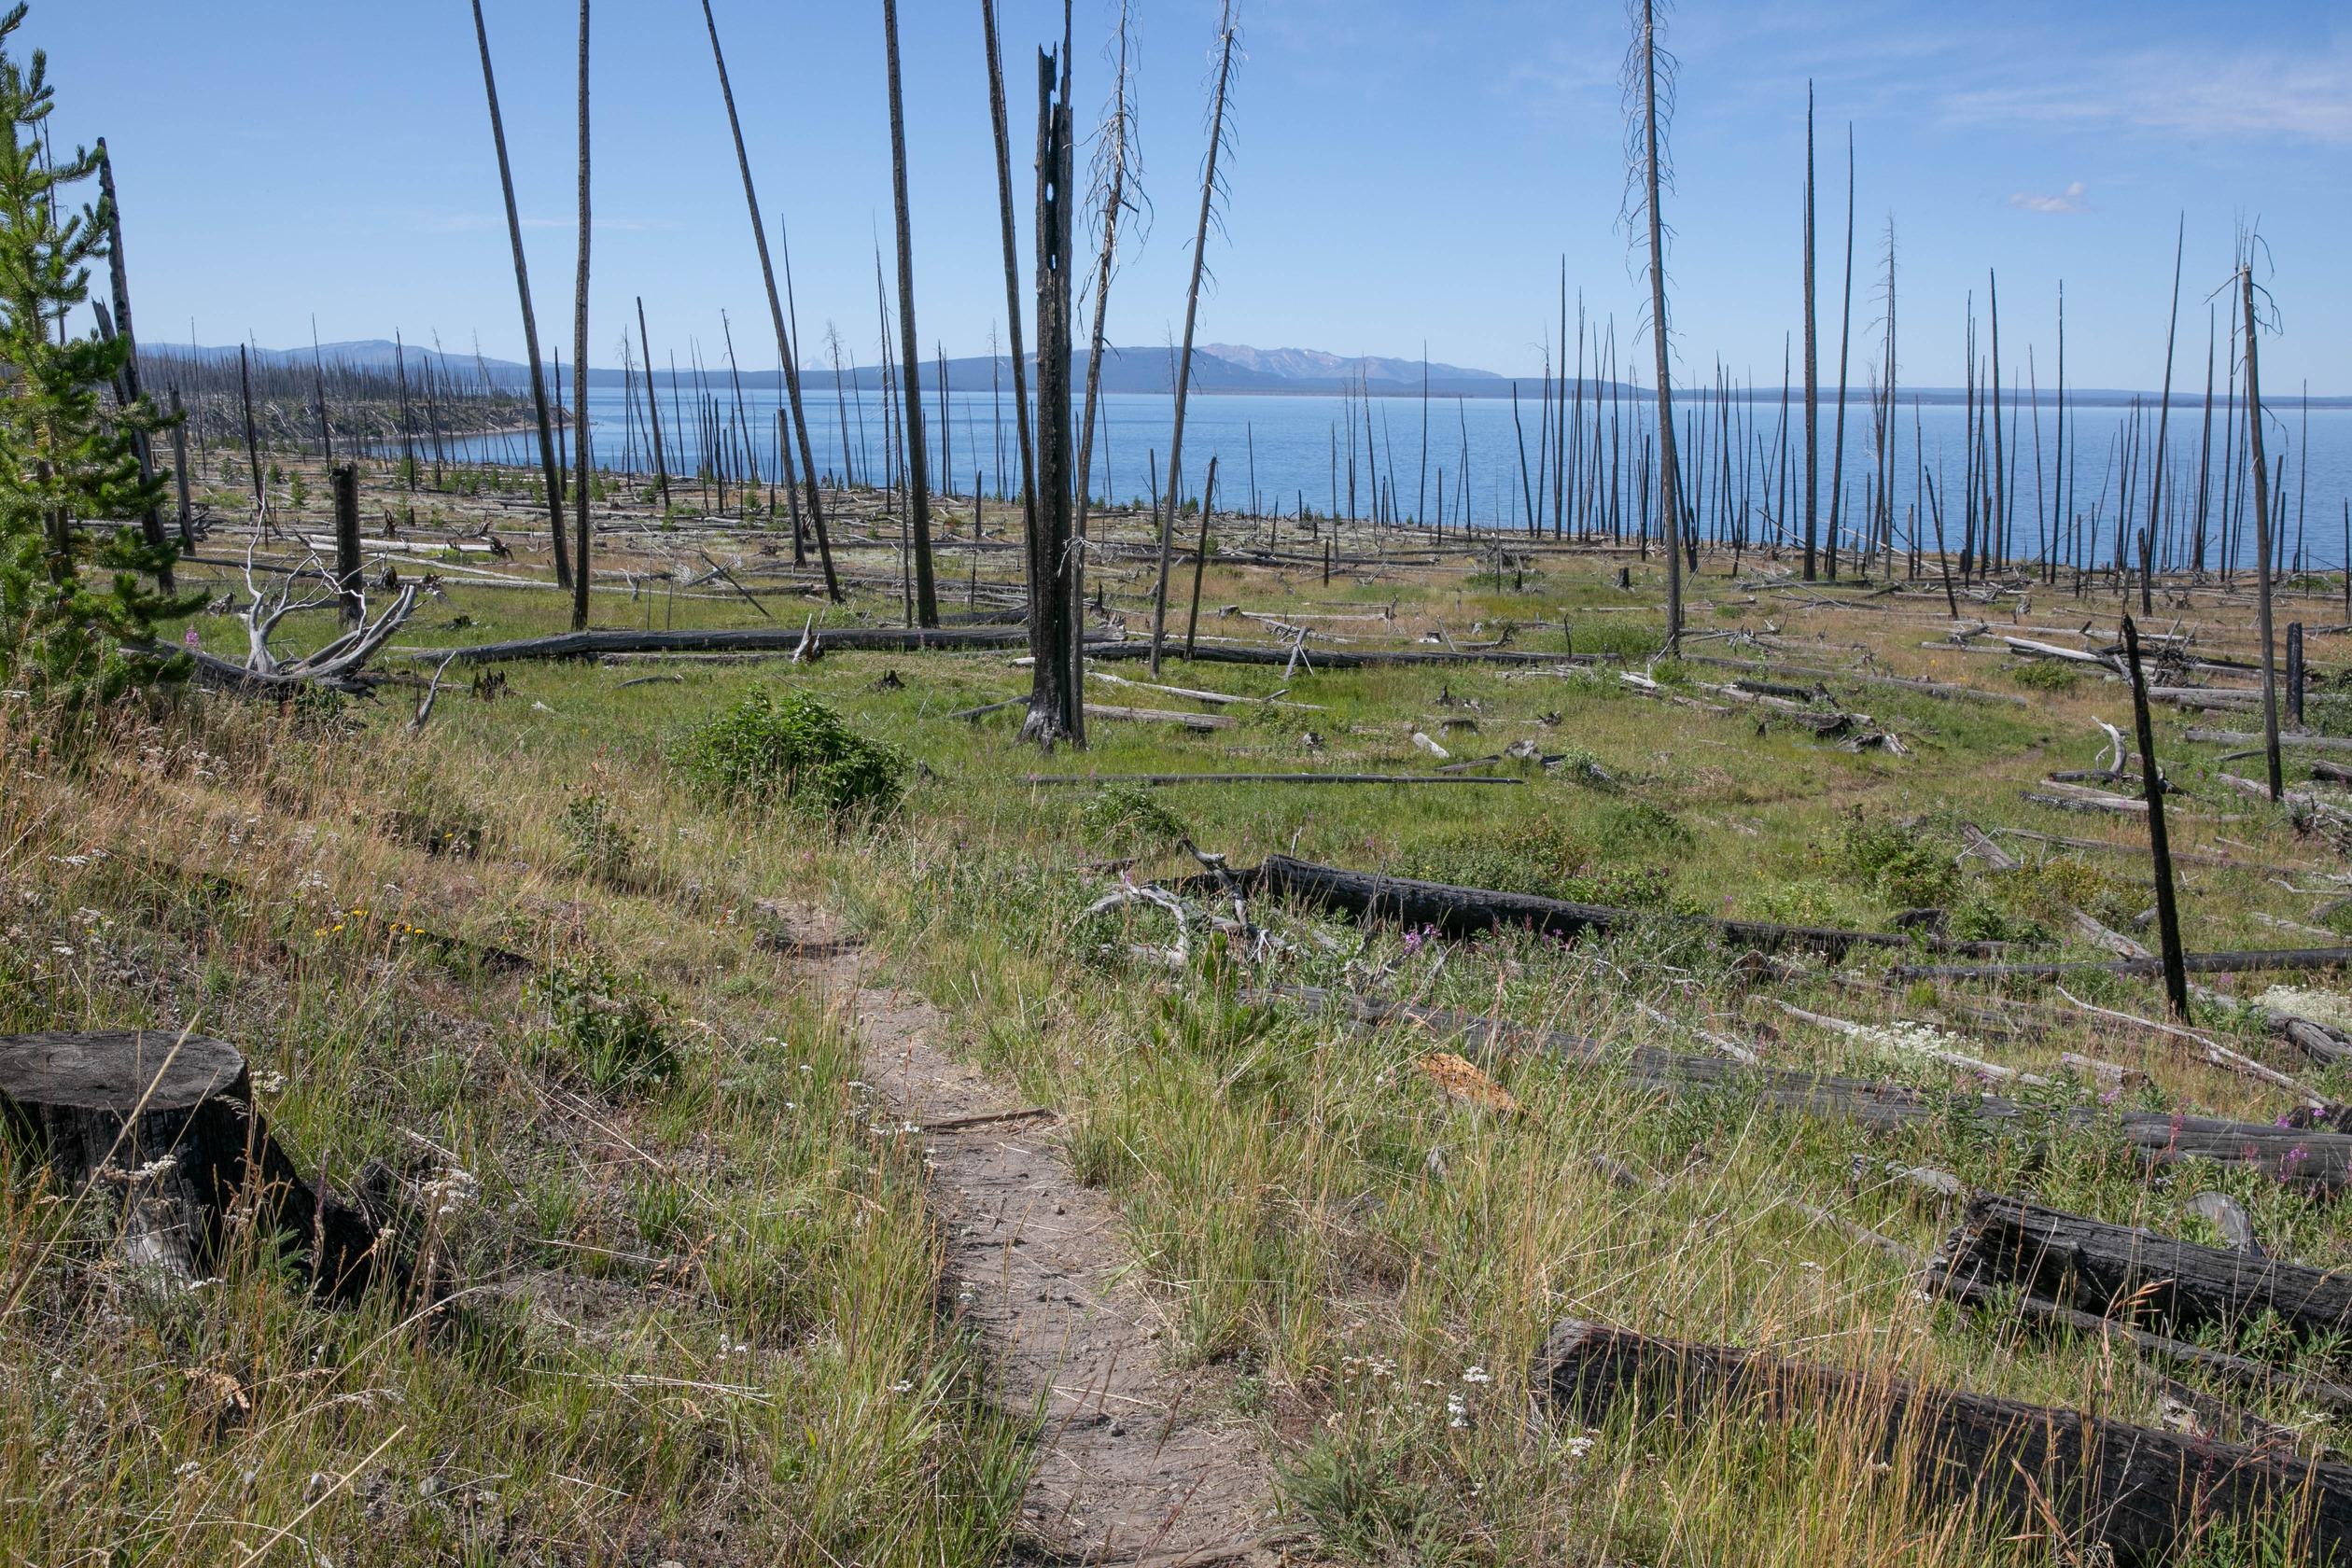 A trail traverses an open area burnt previously by a forest fire with Yellowstone Lake in the background.